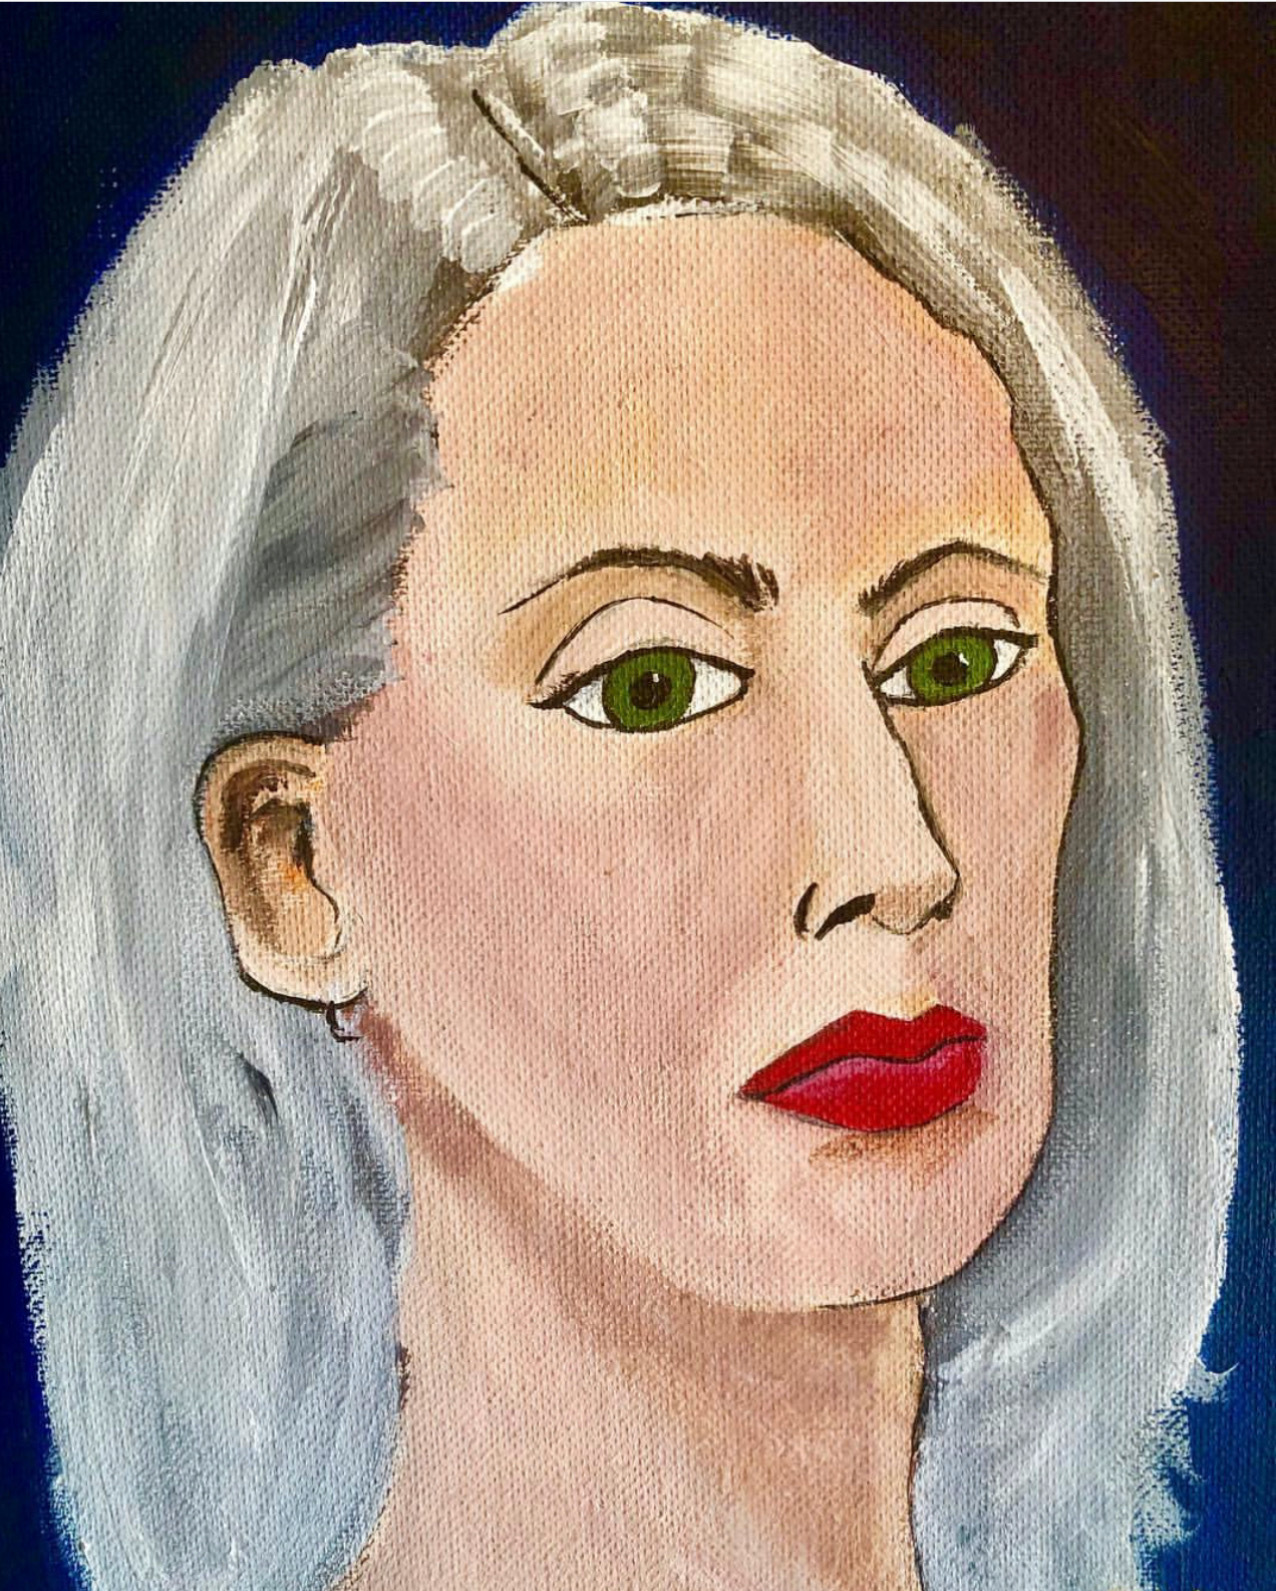 View Image Details Self Portrait With Red Lips